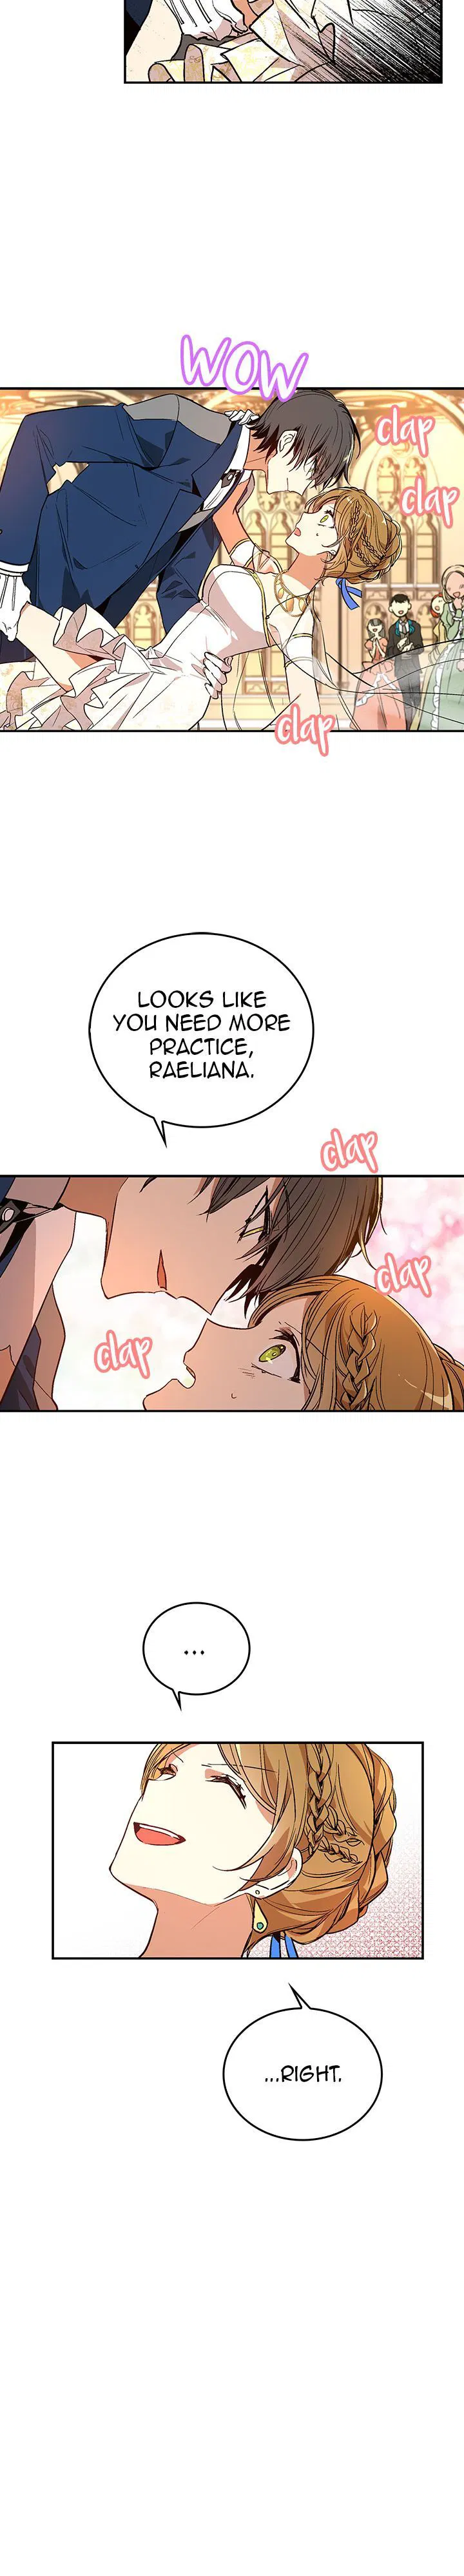 The Reason Why Raeliana Ended Up at the Duke's Mansion Chapter 015 page 13